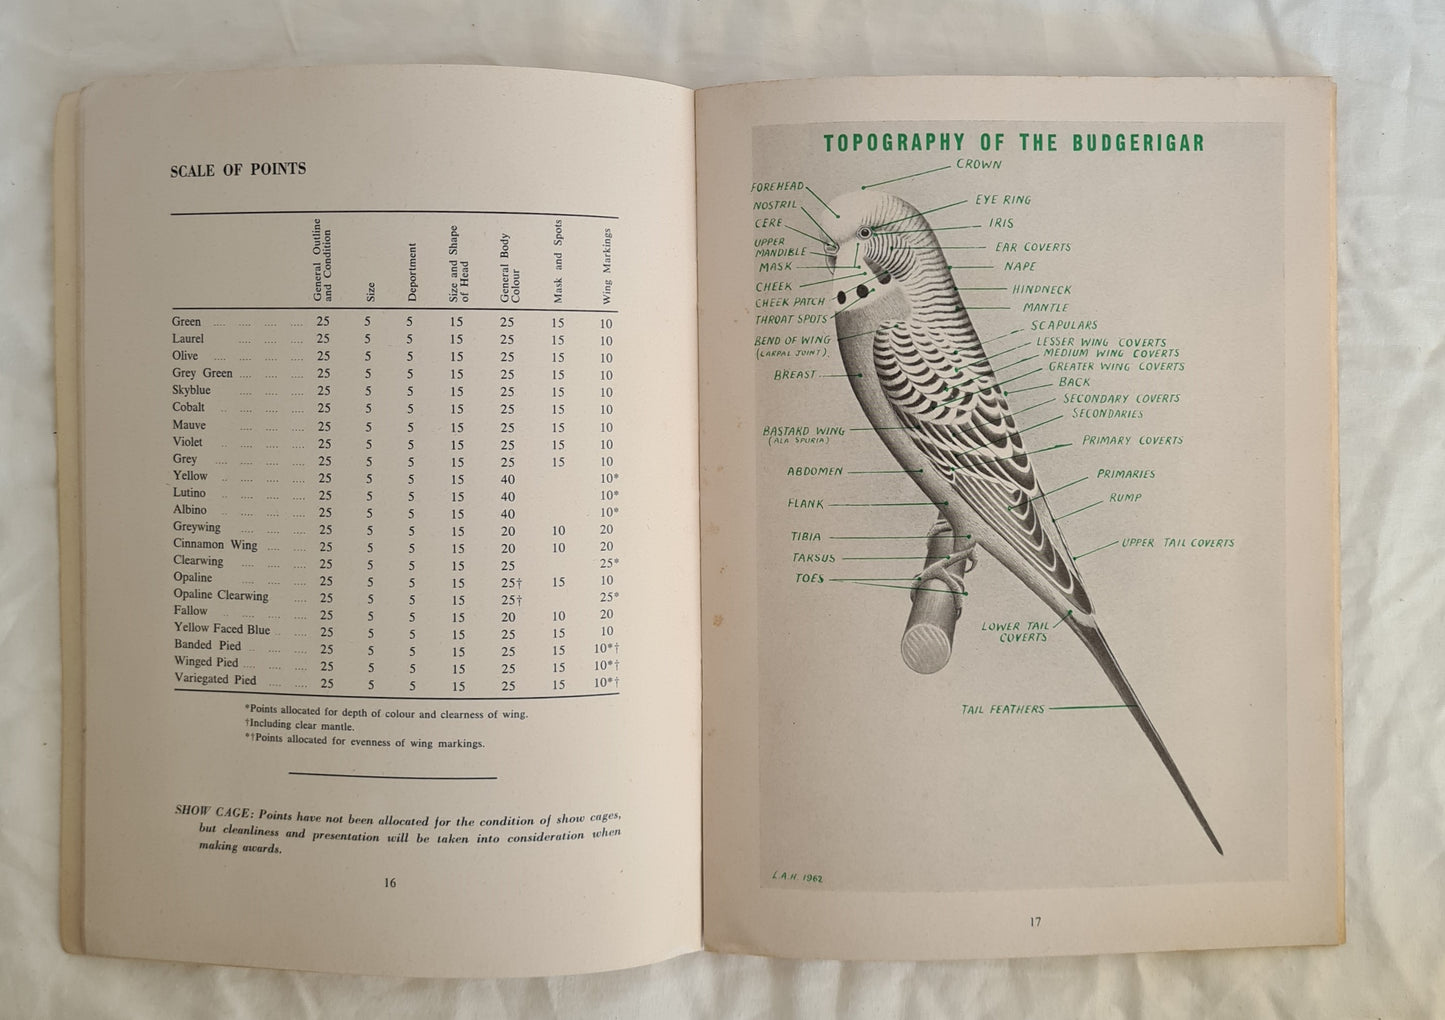 The Budgerigar Standard by The Colour and Standard Committees of The Budgerigar Society of Australasia